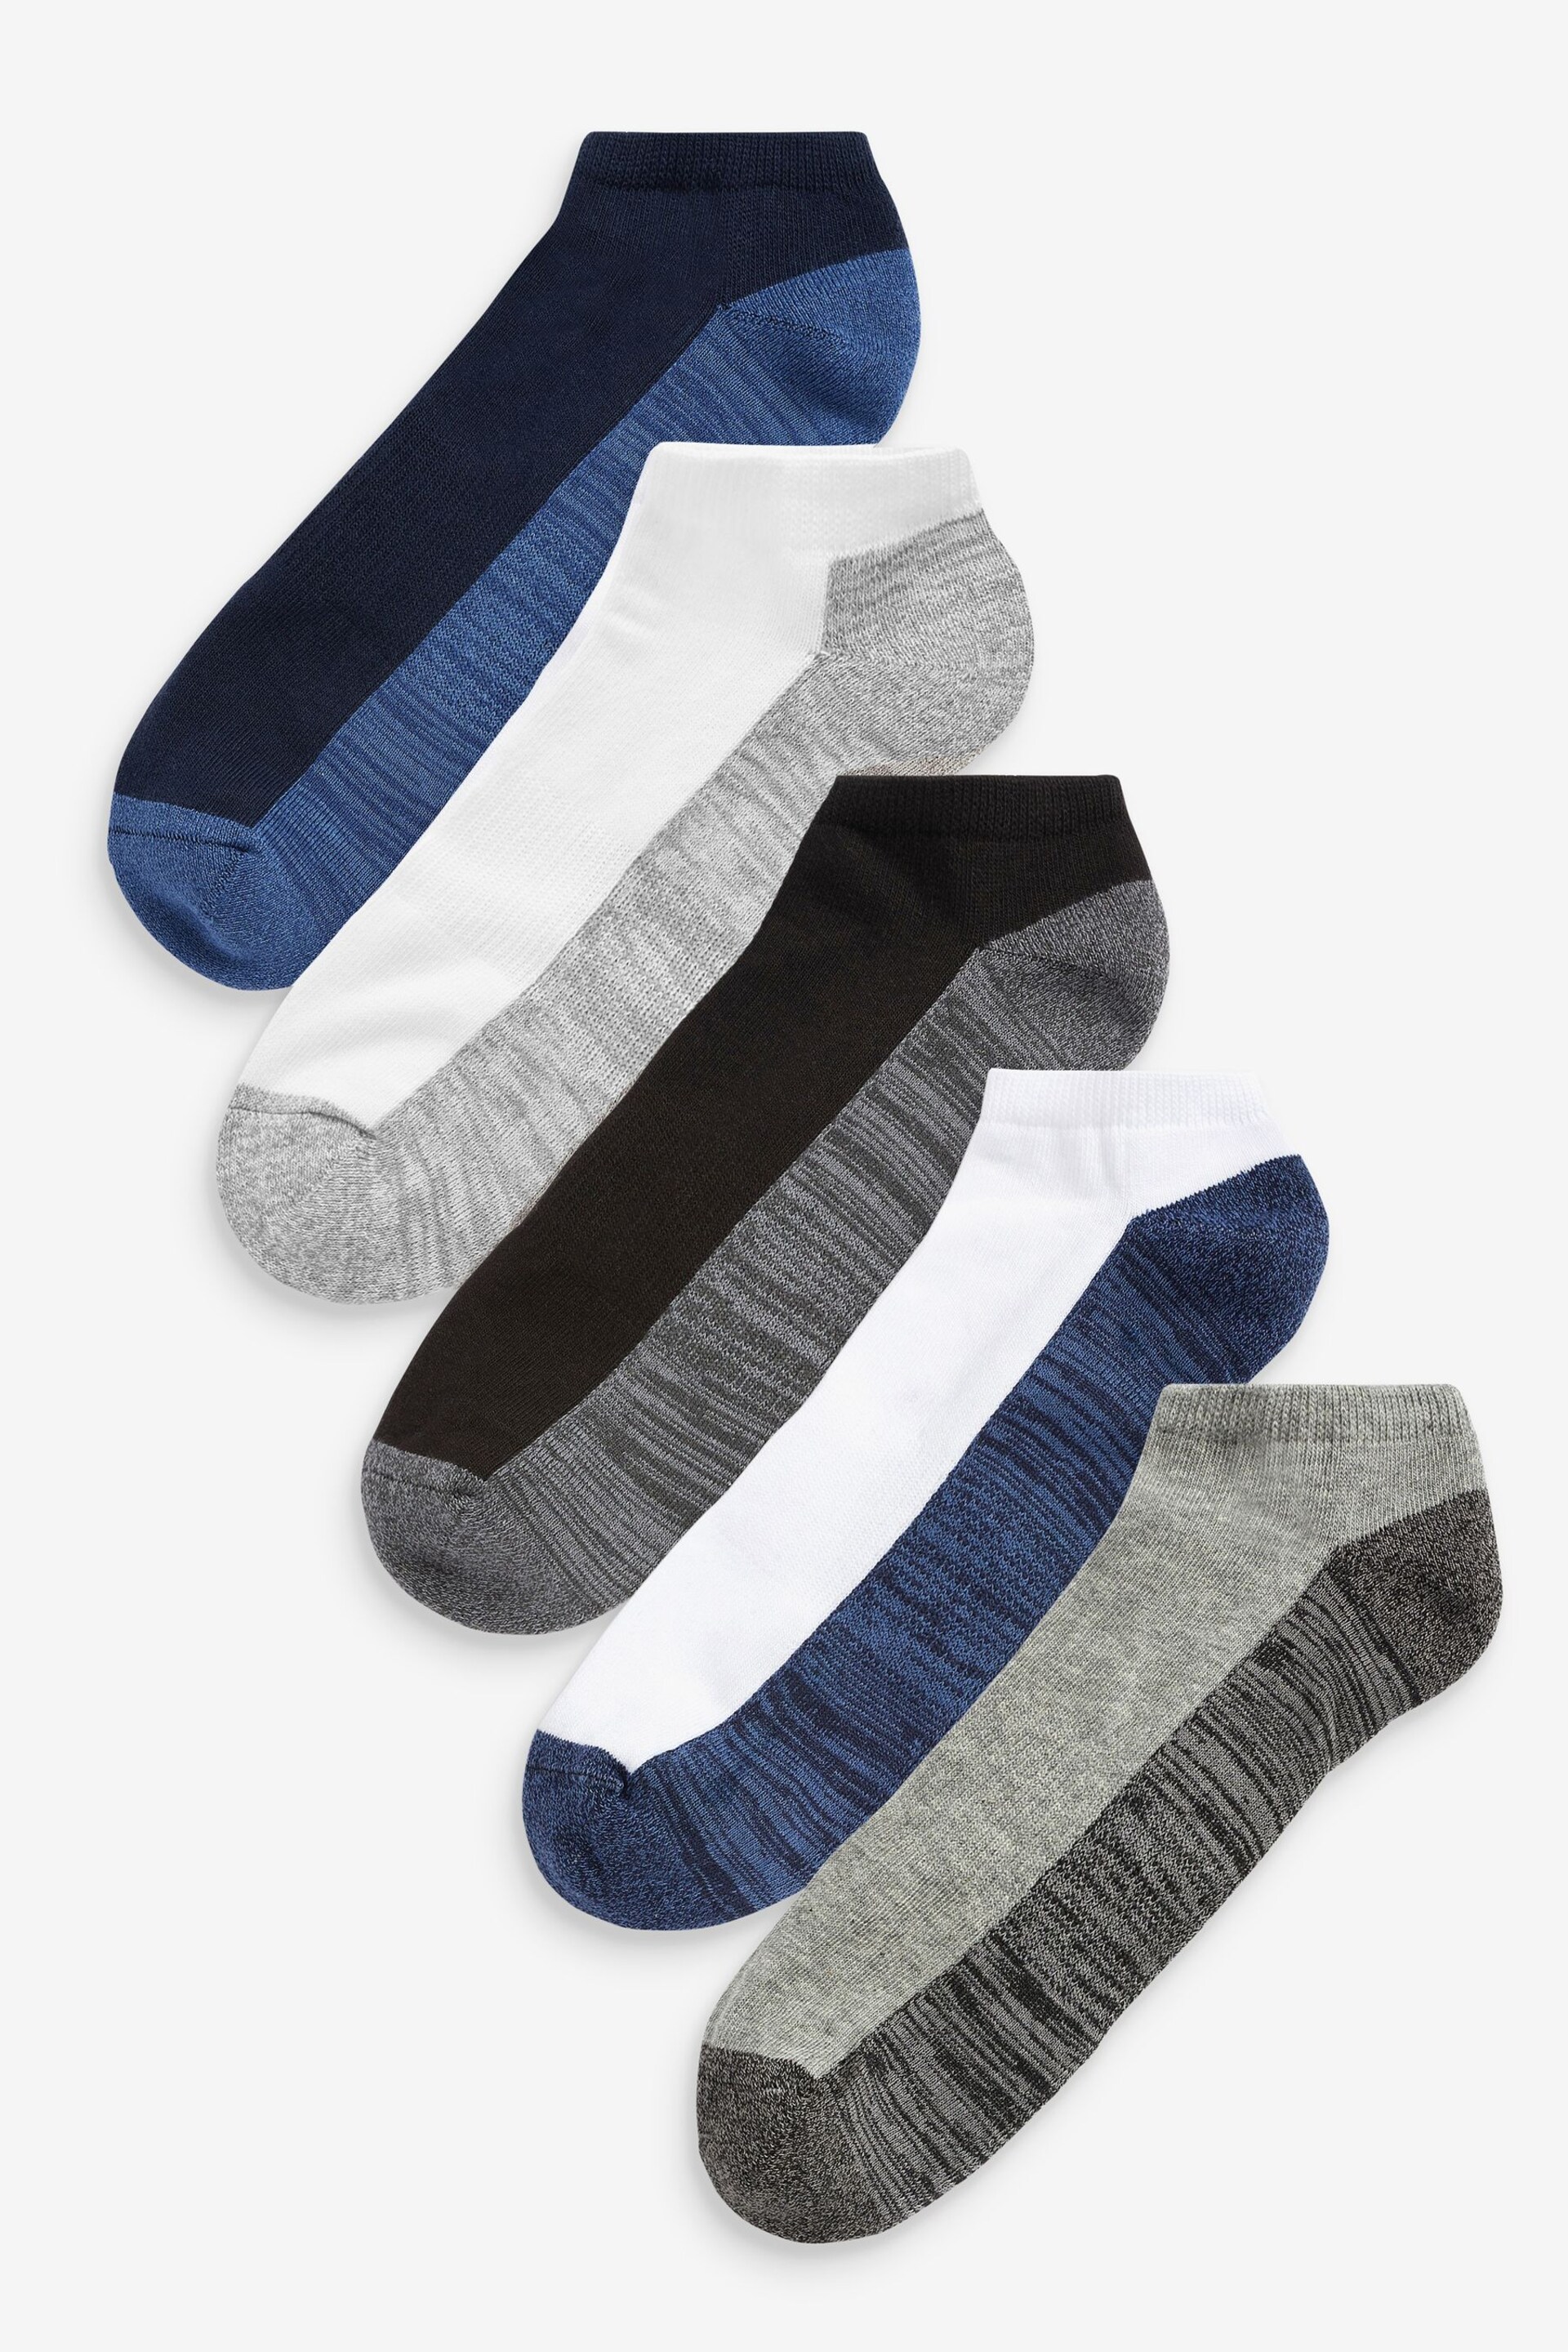 Blue/Grey 5 Pack Cushioned Trainers Socks - Image 1 of 6